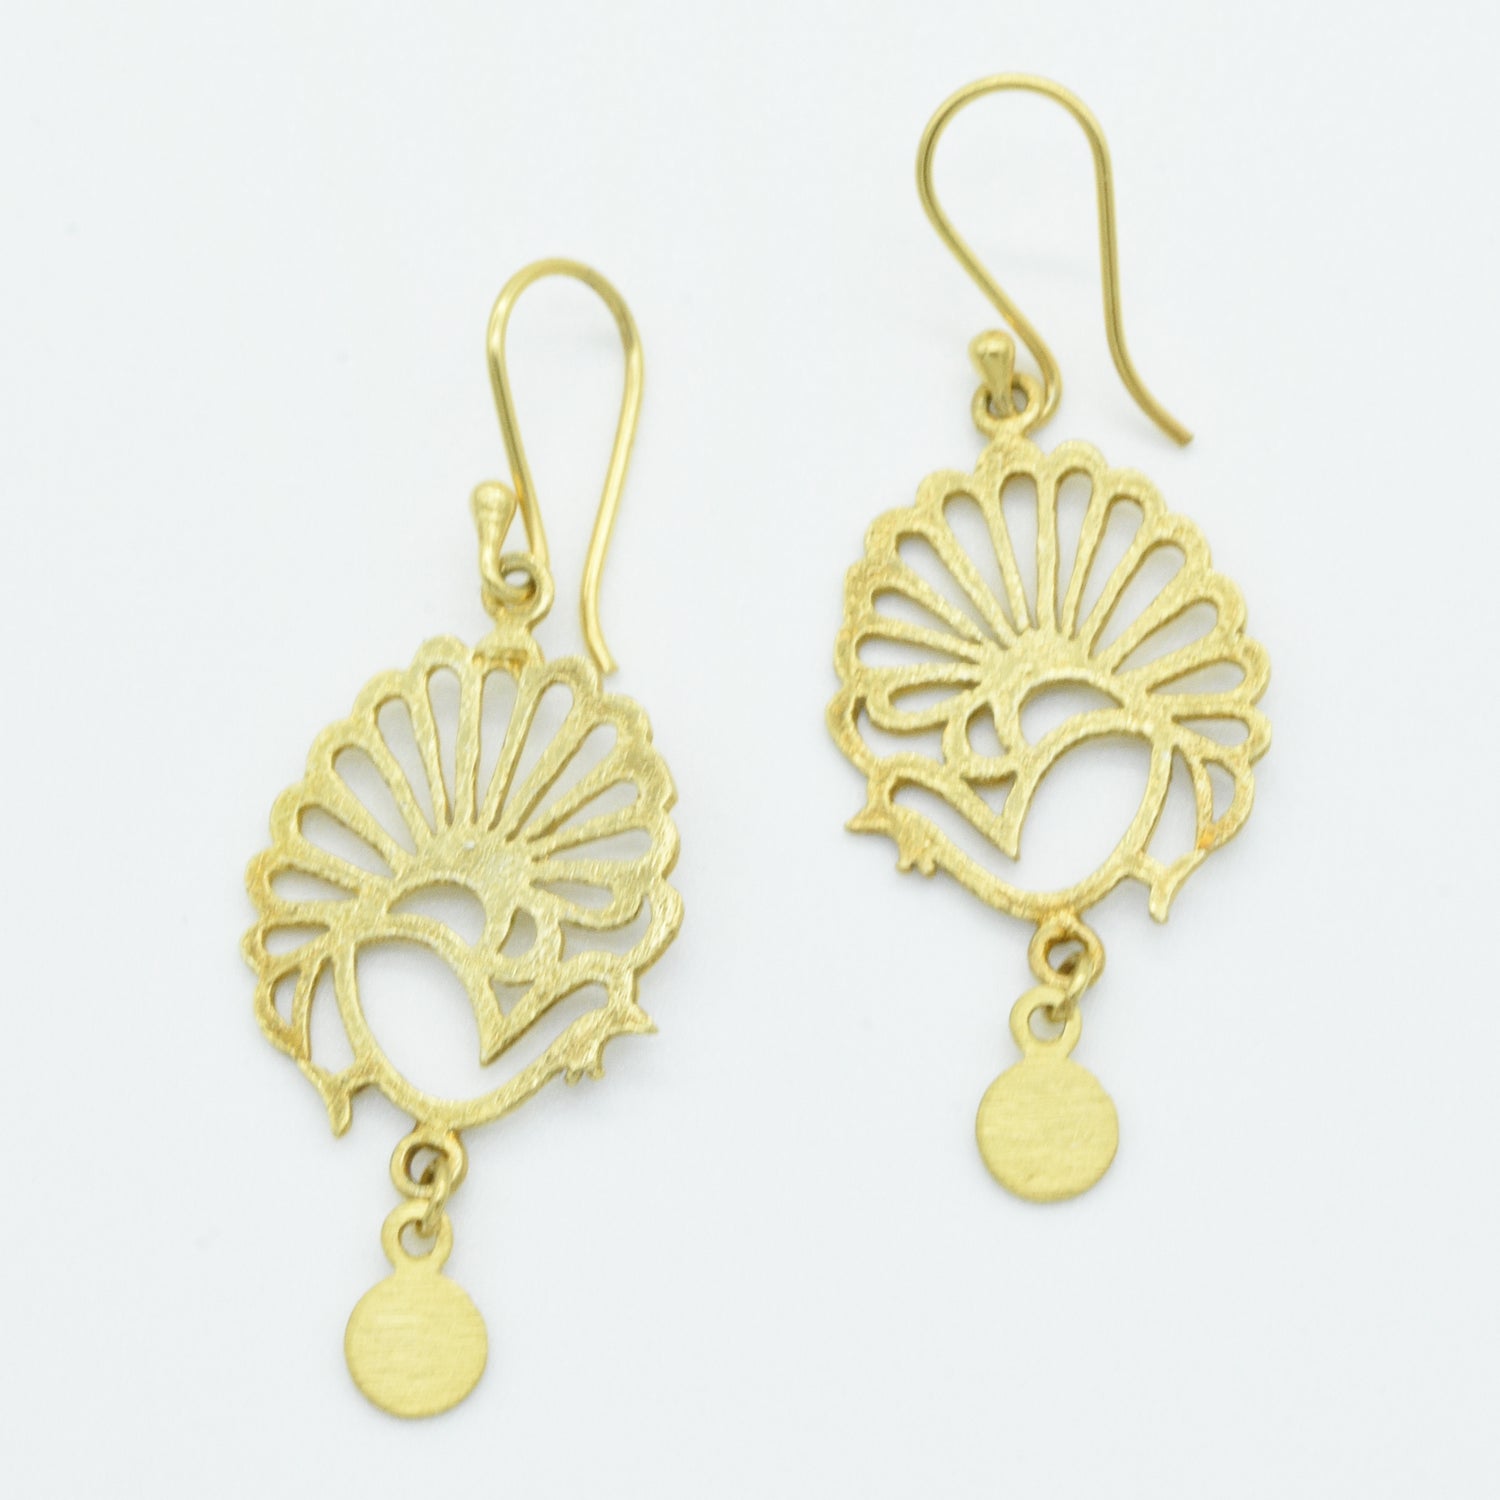 Aylas Filigree earrings - 21ct Gold plated 925 Silver - Handmade in Ottoman style